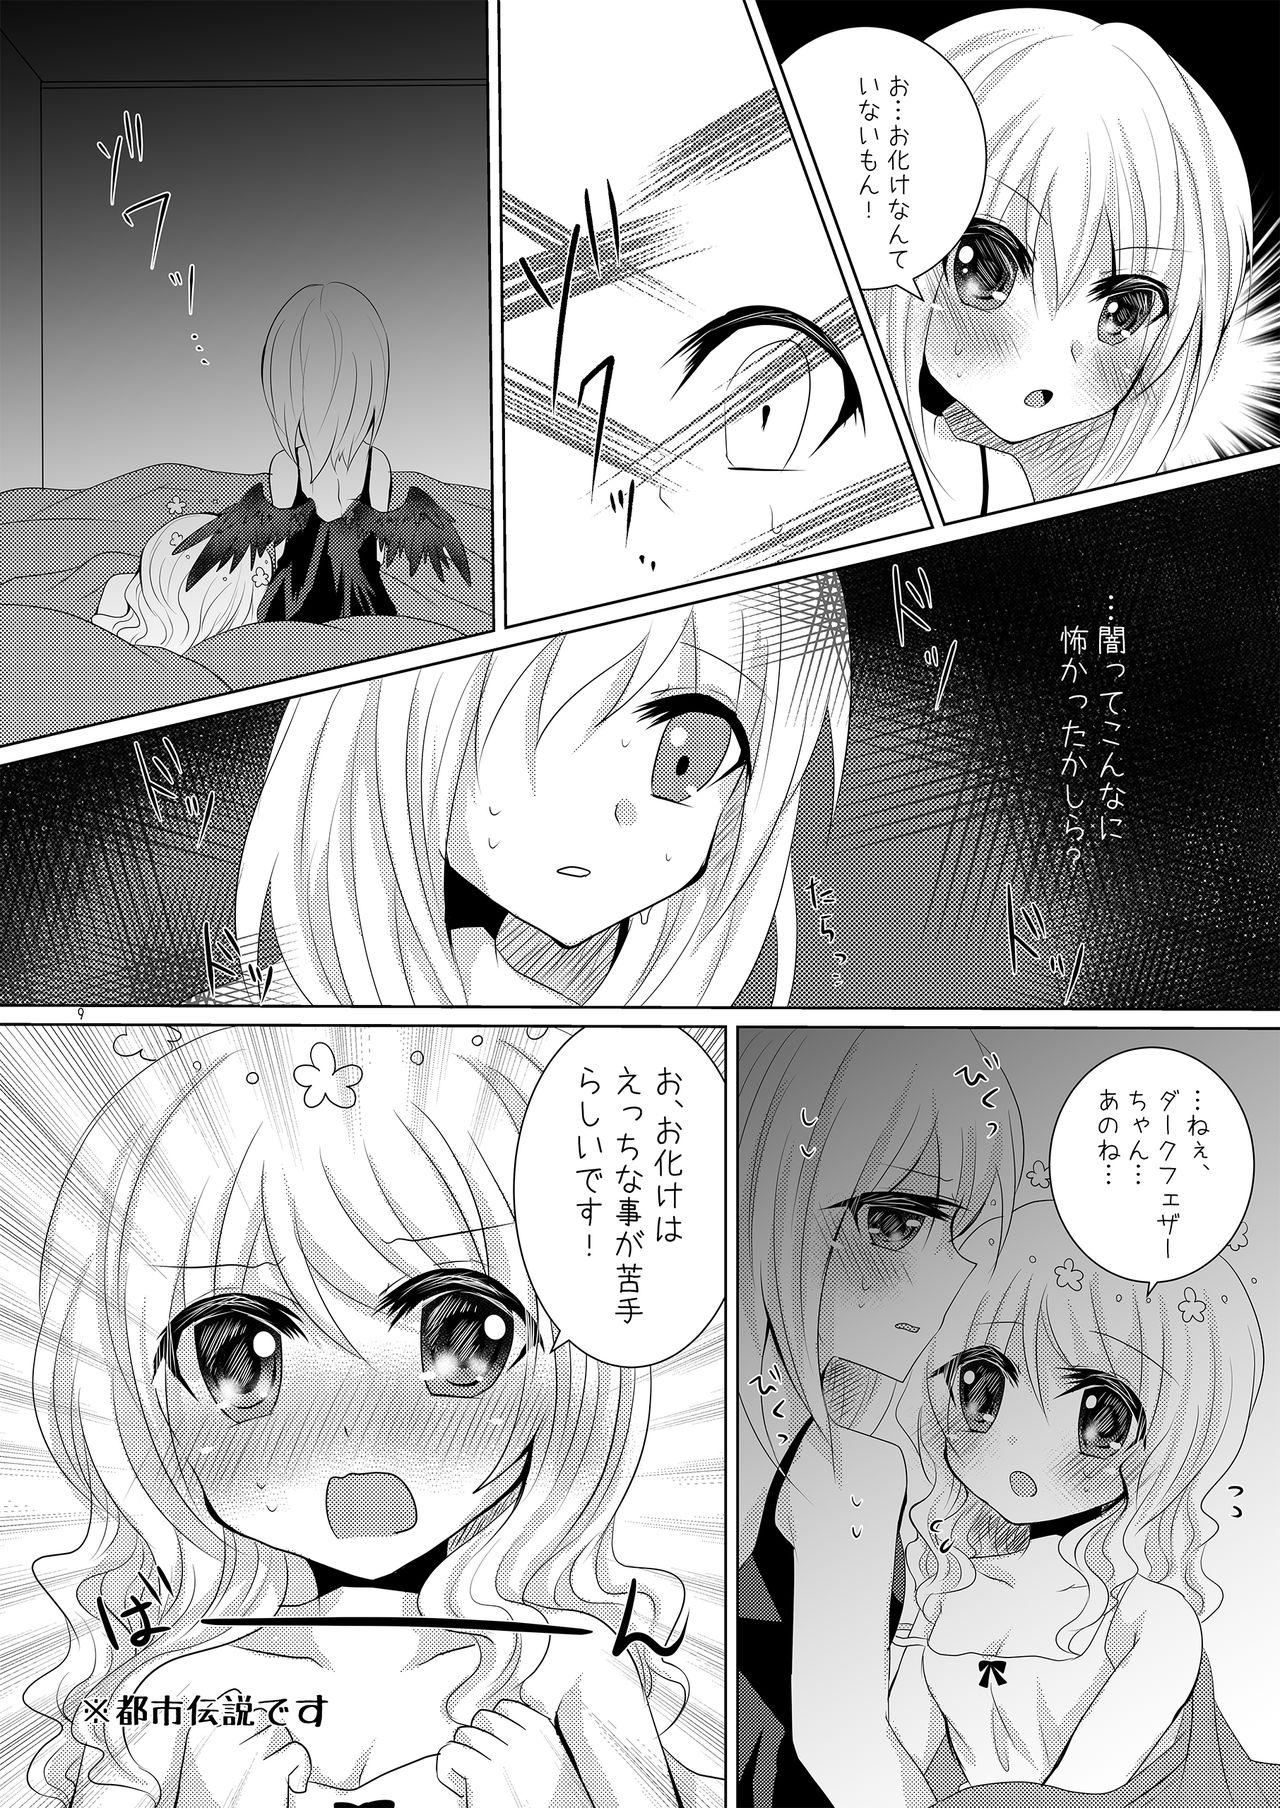 Latinos Tenshi no Tawamure - Emil chronicle online Real Amateur - Page 8